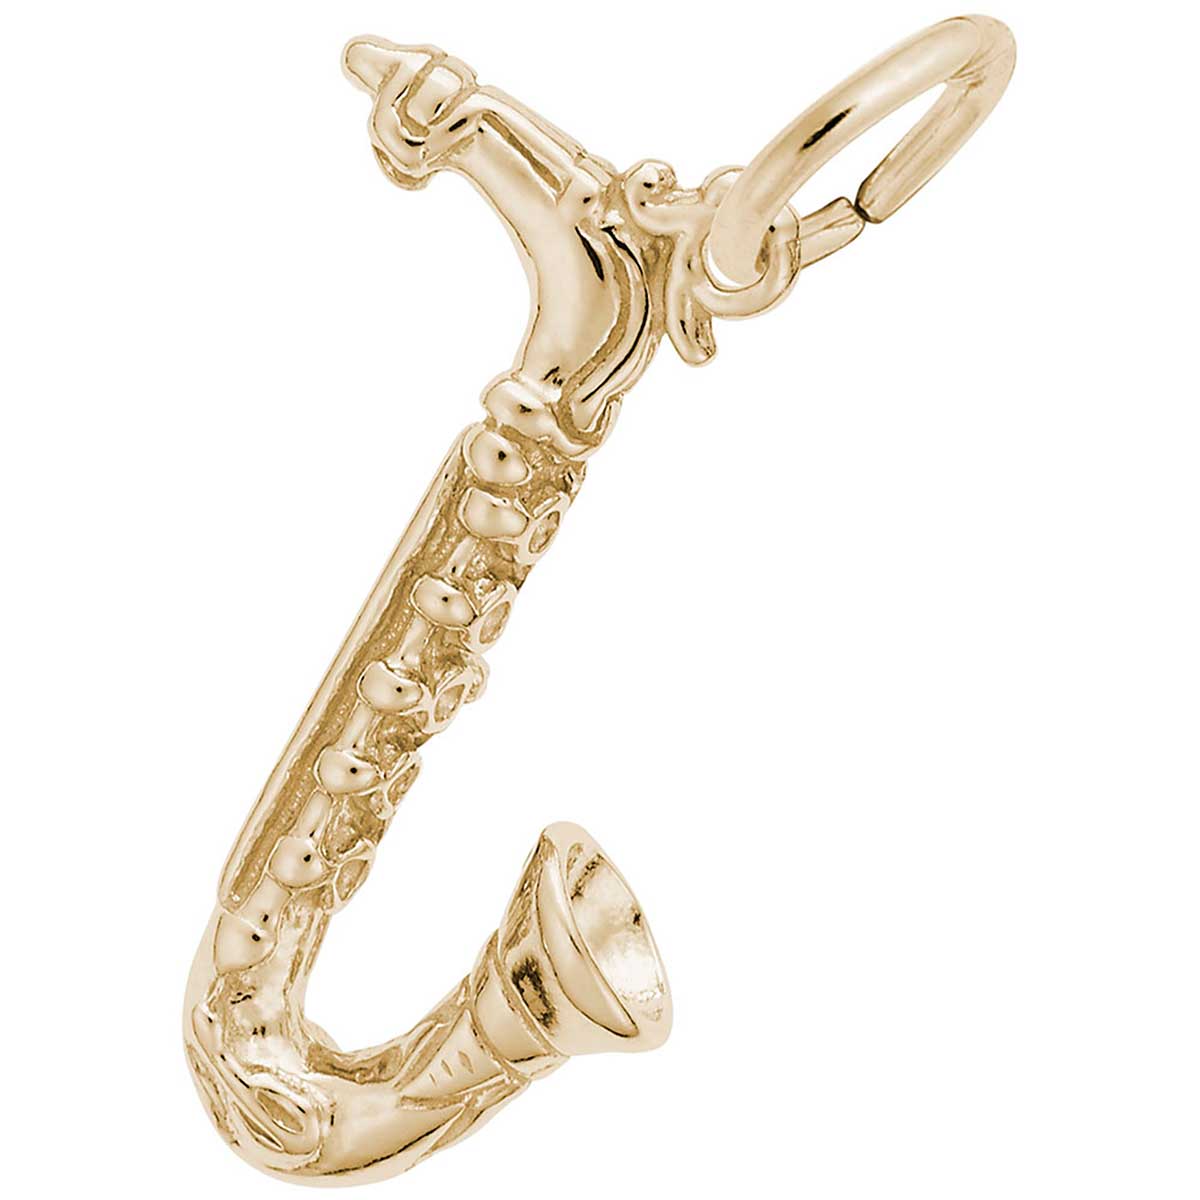 Rembrandt Saxophone Charm, Gold Plated Silver: Precious Accents, Ltd.